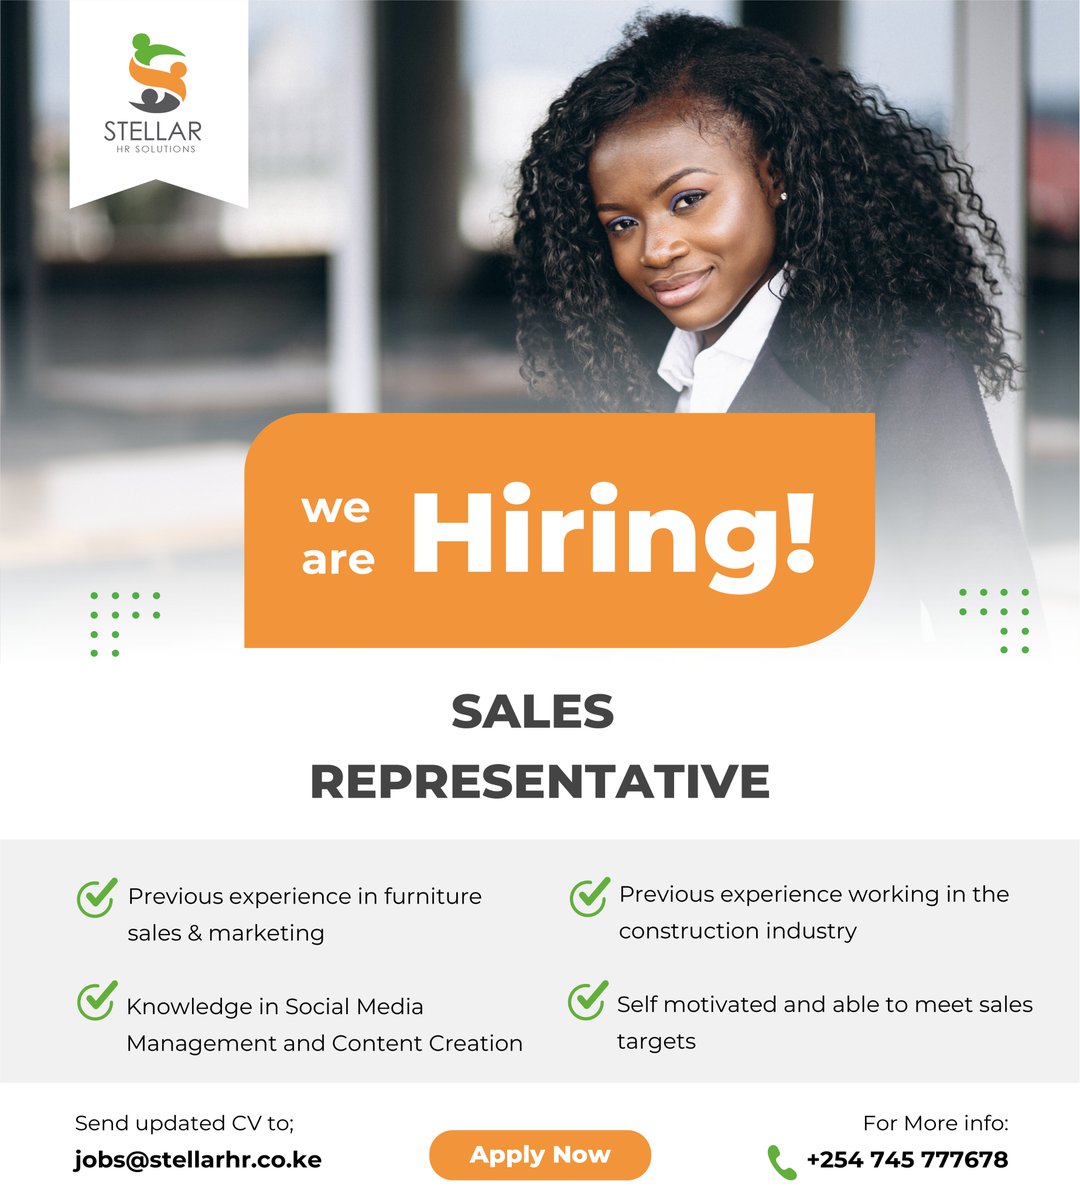 #WeAreHiring 
Our client in the interior design industry is seeking to acquire a sales representative.

You can apply via;
jobs@stellarhr.co.ke
#ikokazike #jobopportunity